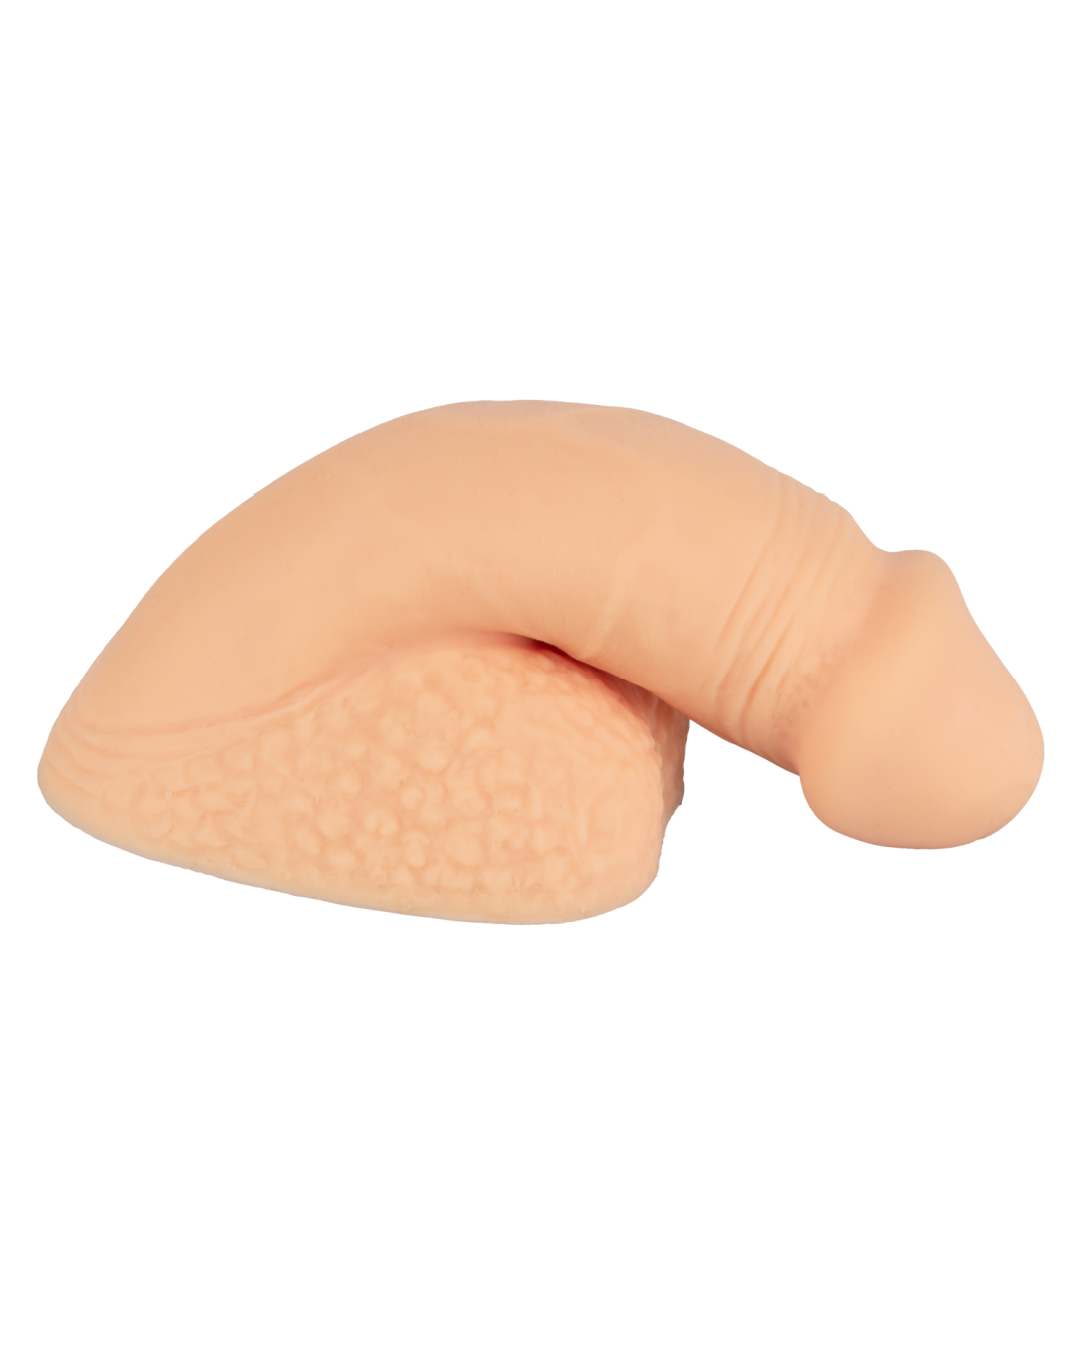 Packer Gear Silicone Packing Penis 4 Inch - Vanilla